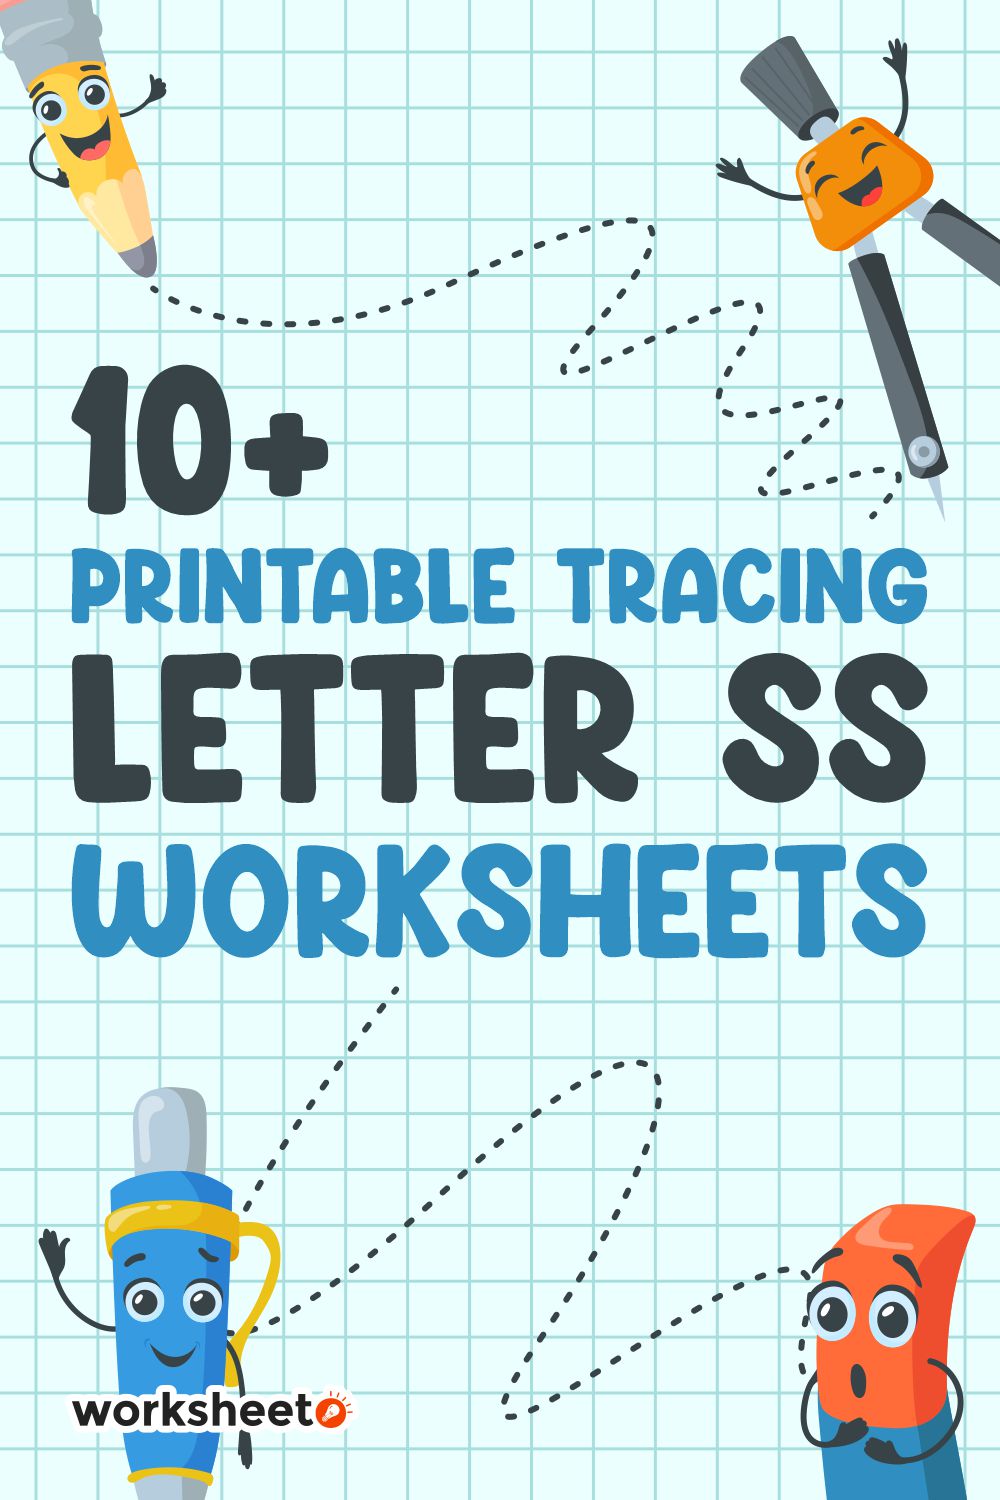 Printable Tracing Letter SS Worksheets